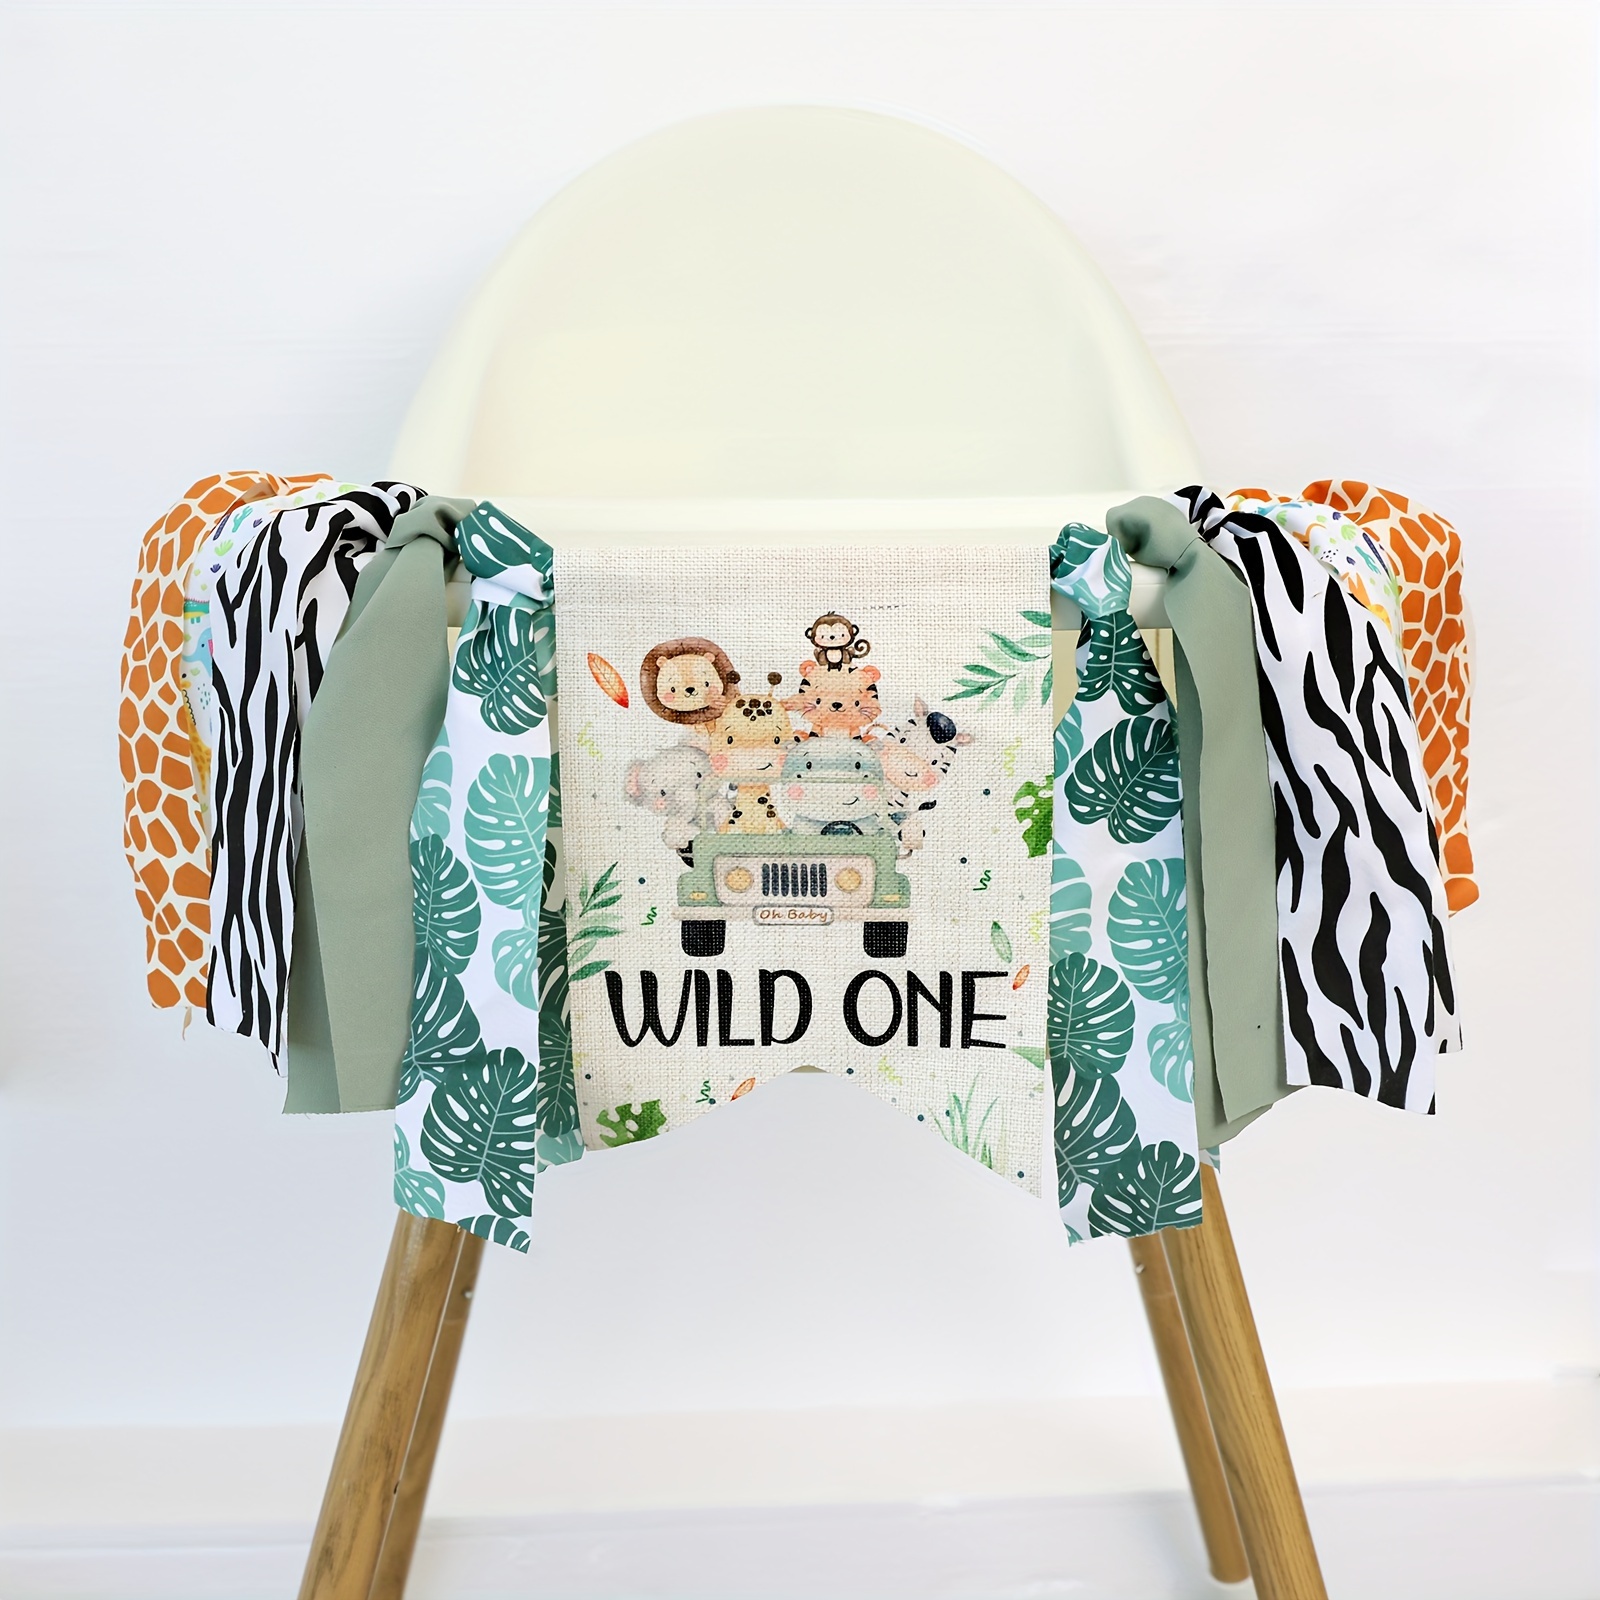 

1pc Wild 1 Green Highchair Banner For Safari Themed Birthday Decorations, Woodland Party Decorations, Wild Jungle Birthday Decorations, Room Decorations, Cake Smash Photo Props